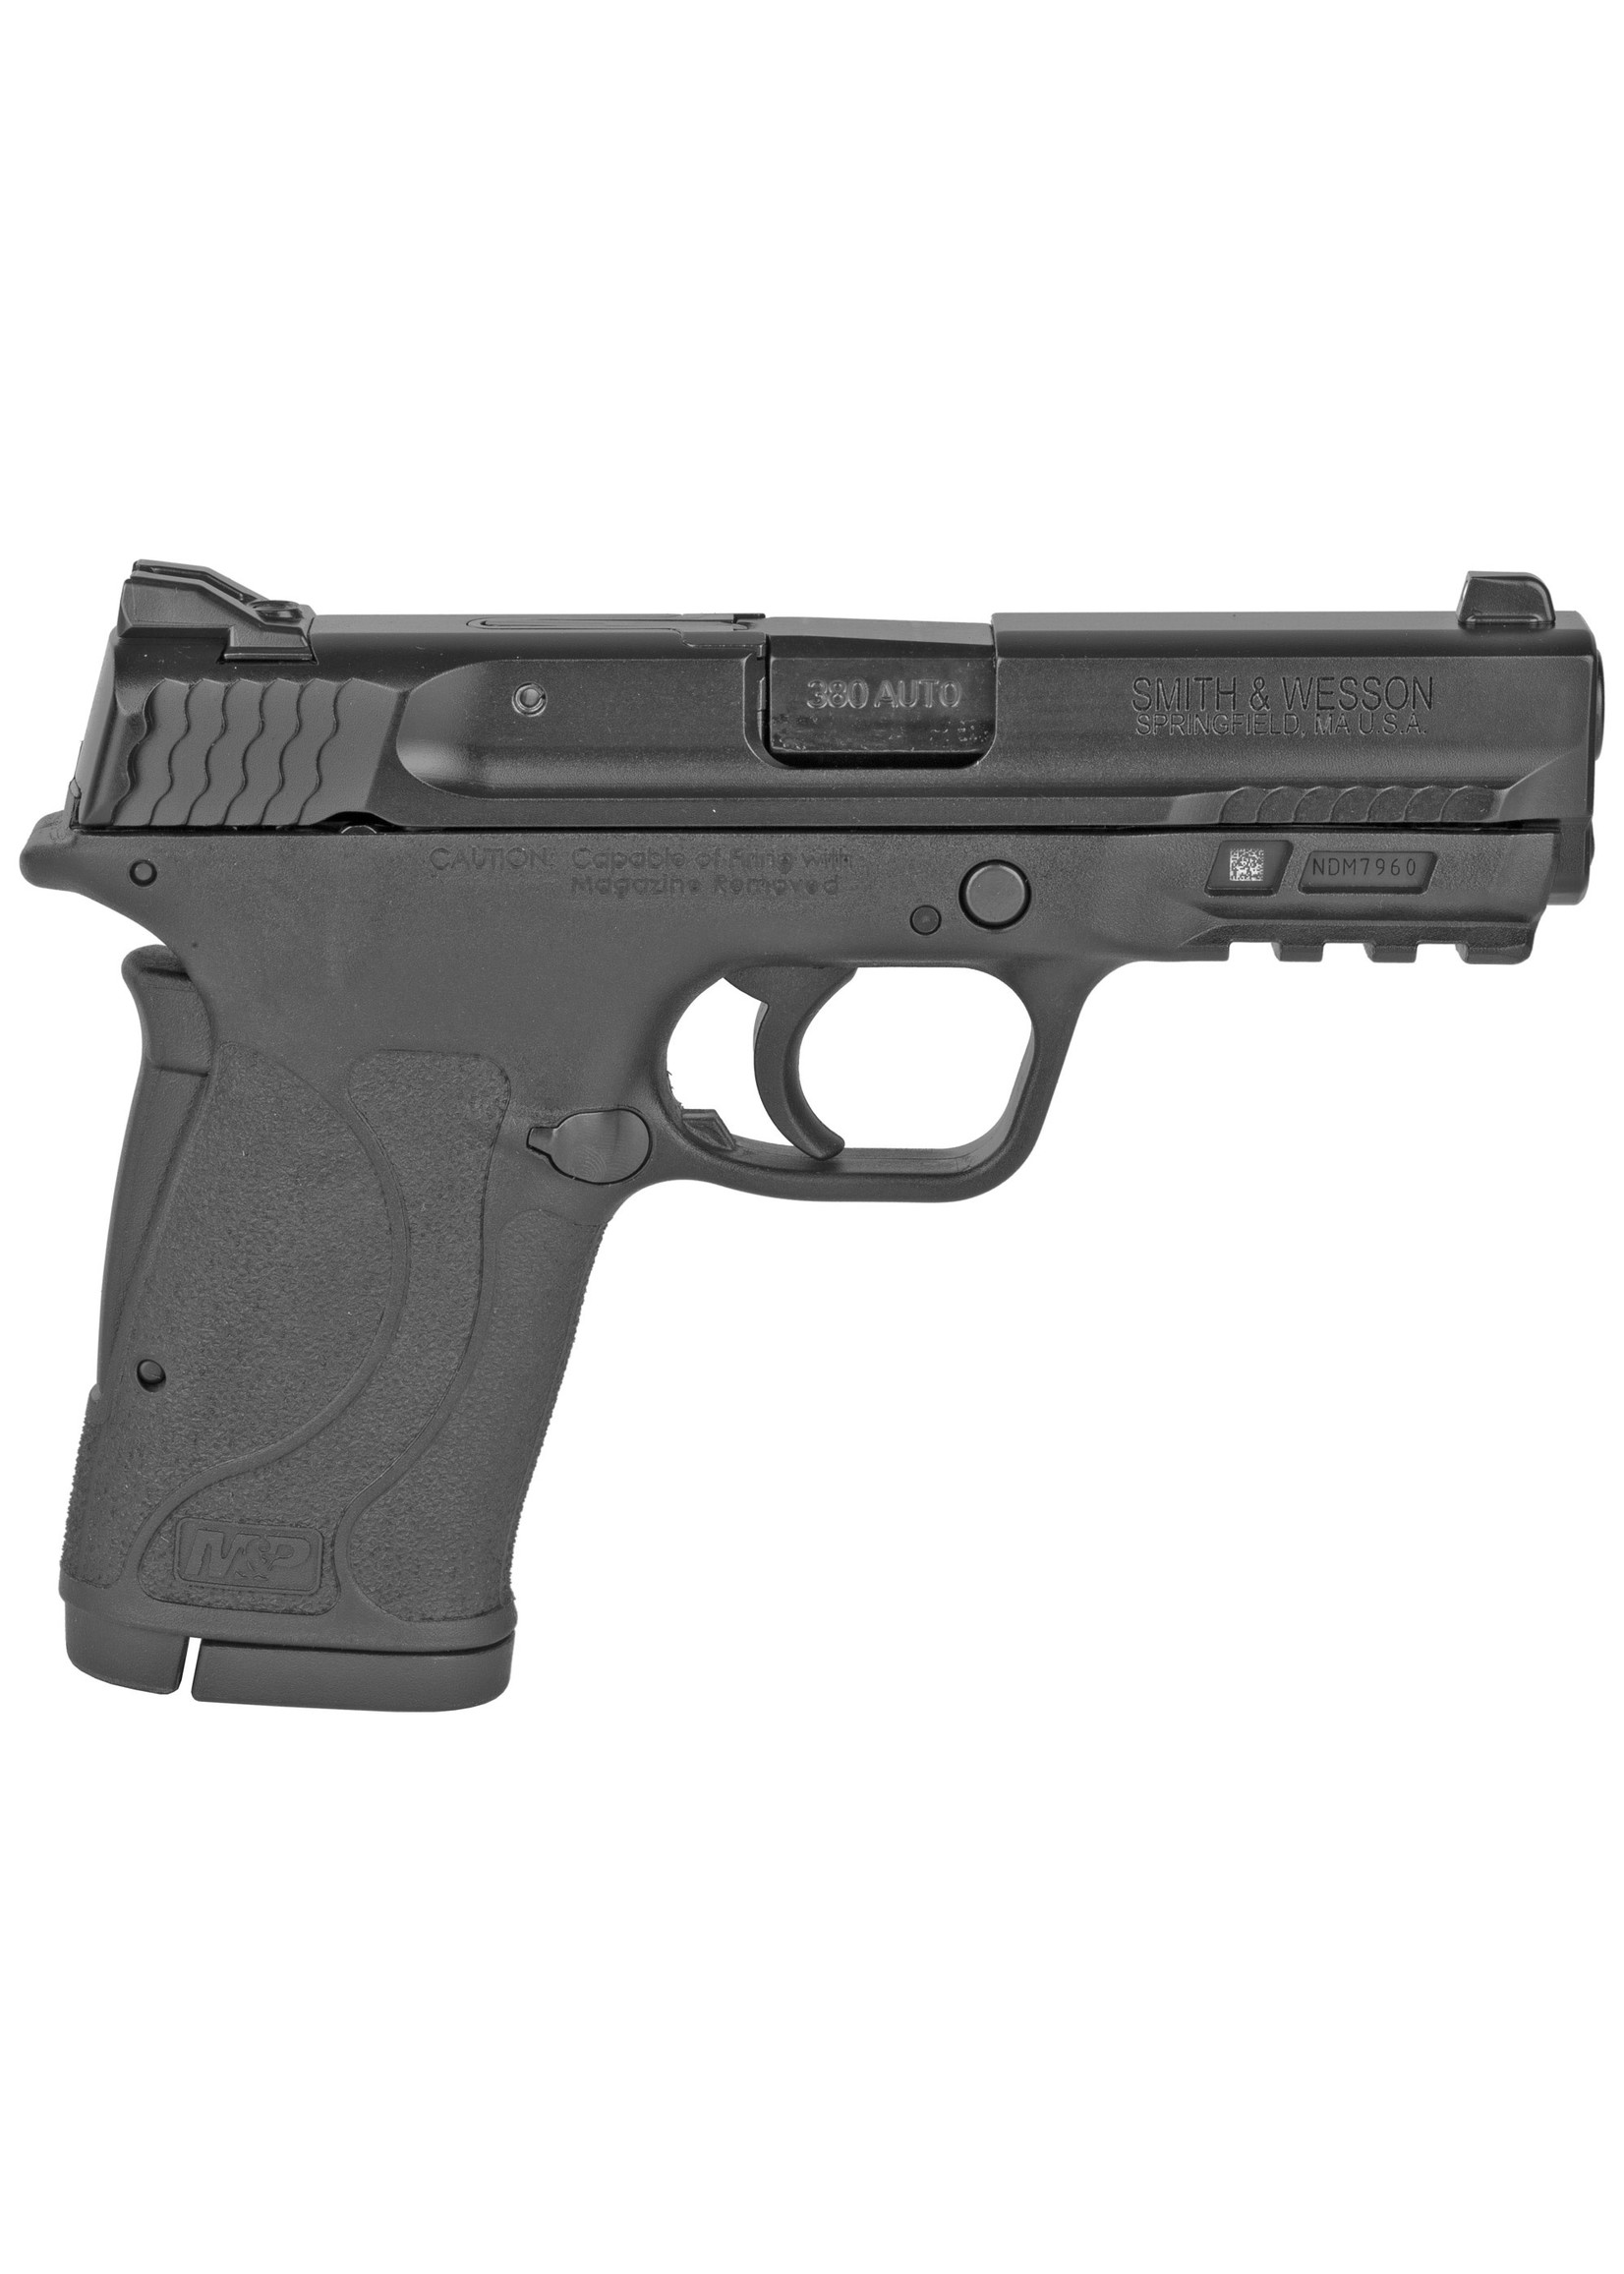 Smith and Wesson (S&W) Smith & Wesson, M&P380 Shield EZ M2.0, Internal Hammer Fired, Semi-automatic, Polymer Frame Pistol, Micro-Compact, 380ACP, 3.68" Barrel, Armornite Finish, Black, 3 Dot Sights, 8 Rounds, 2 Magazines